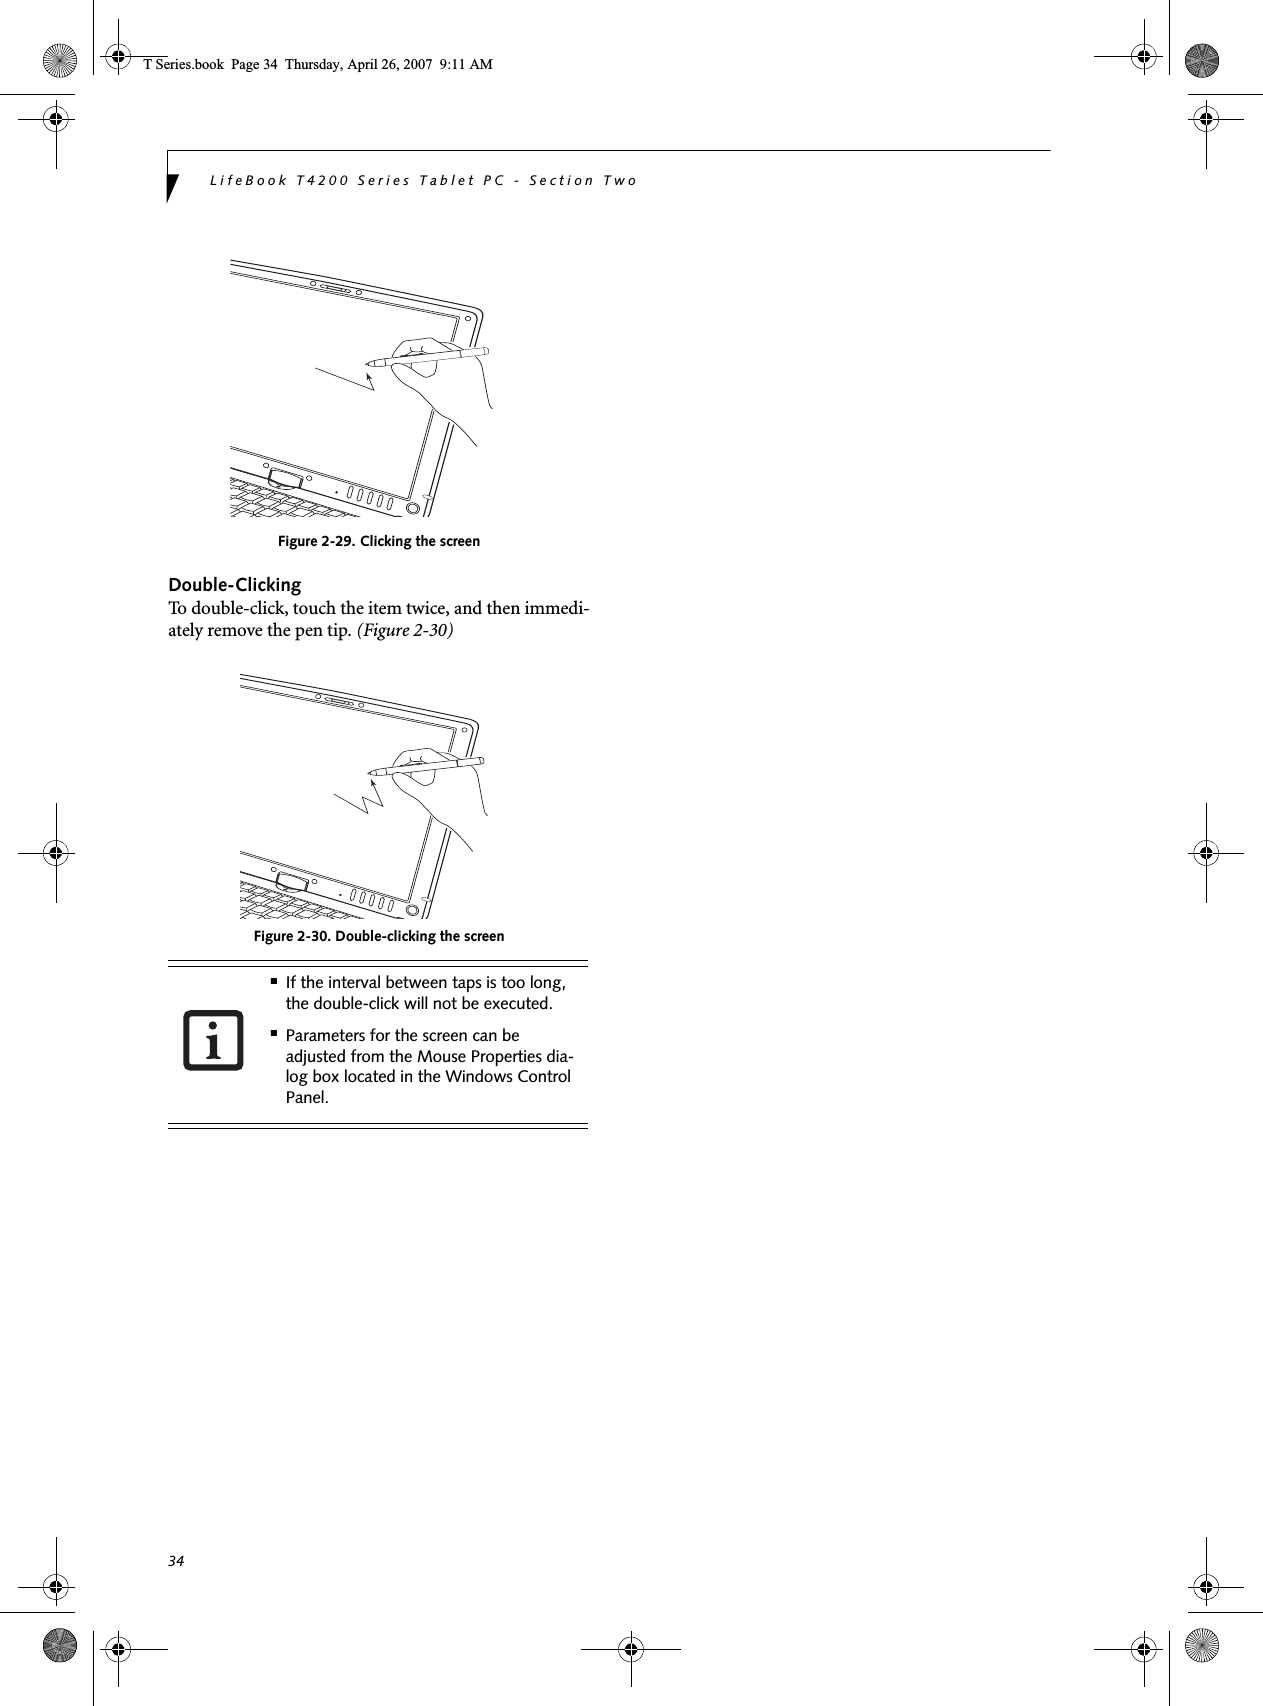 34LifeBook T4200 Series Tablet PC - Section TwoFigure 2-29. Clicking the screenDouble-ClickingTo double-click, touch the item twice, and then immedi-ately remove the pen tip. (Figure 2-30)Figure 2-30. Double-clicking the screen■If the interval between taps is too long, the double-click will not be executed.■Parameters for the screen can be adjusted from the Mouse Properties dia-log box located in the Windows Control Panel.T Series.book  Page 34  Thursday, April 26, 2007  9:11 AM